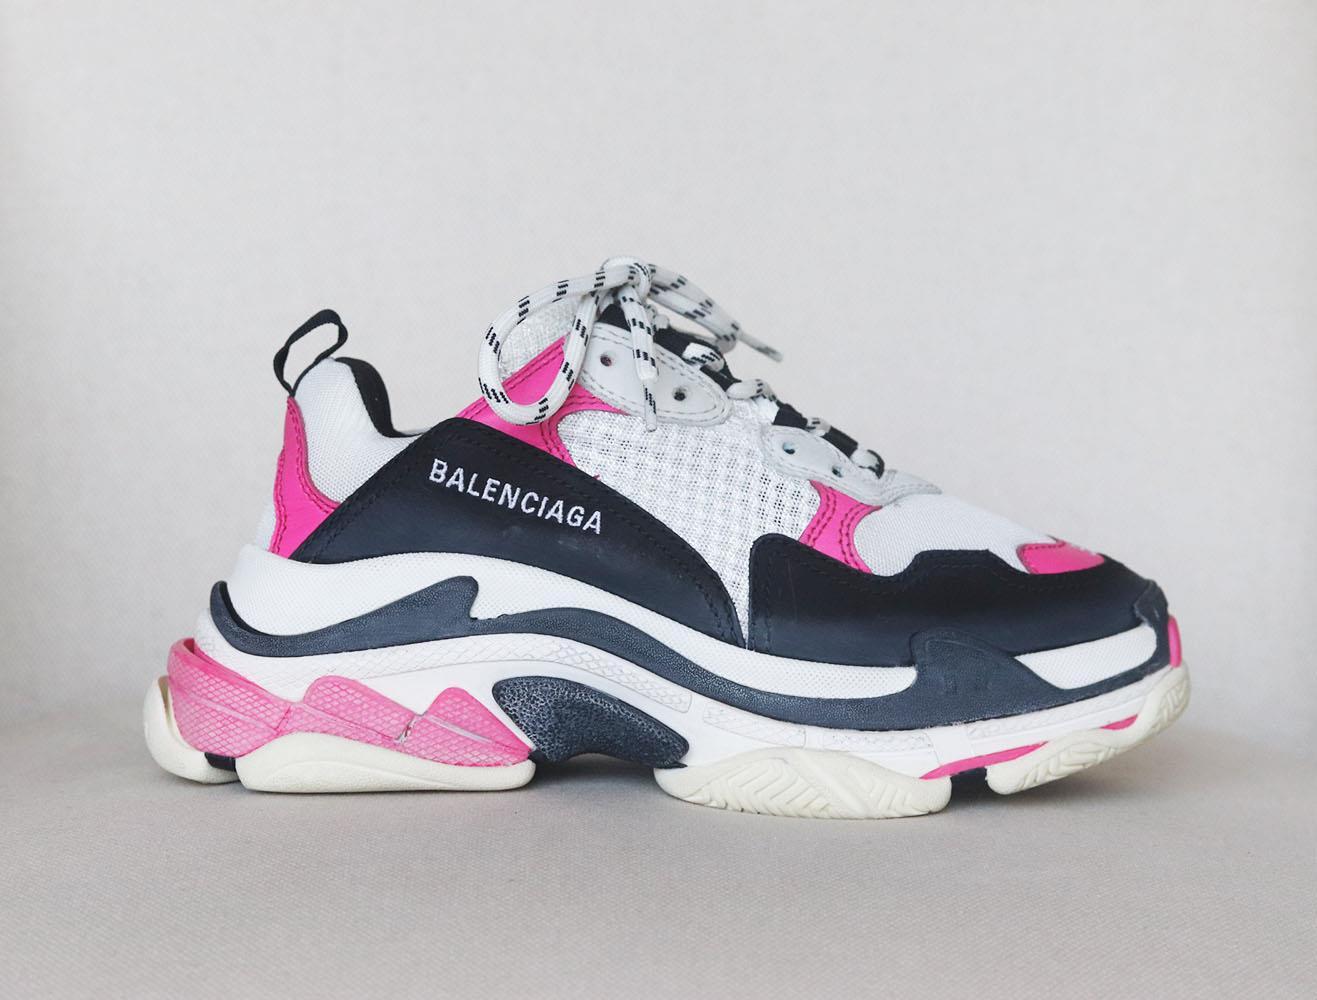 Balenciaga's coveted 'Triple S' design are the archetype of the season's 'dad sneaker' trend, so it's no surprise they're selling out so fast and this iteration is set on the signature triple-stacked sole and has panels of lightly faded leather for